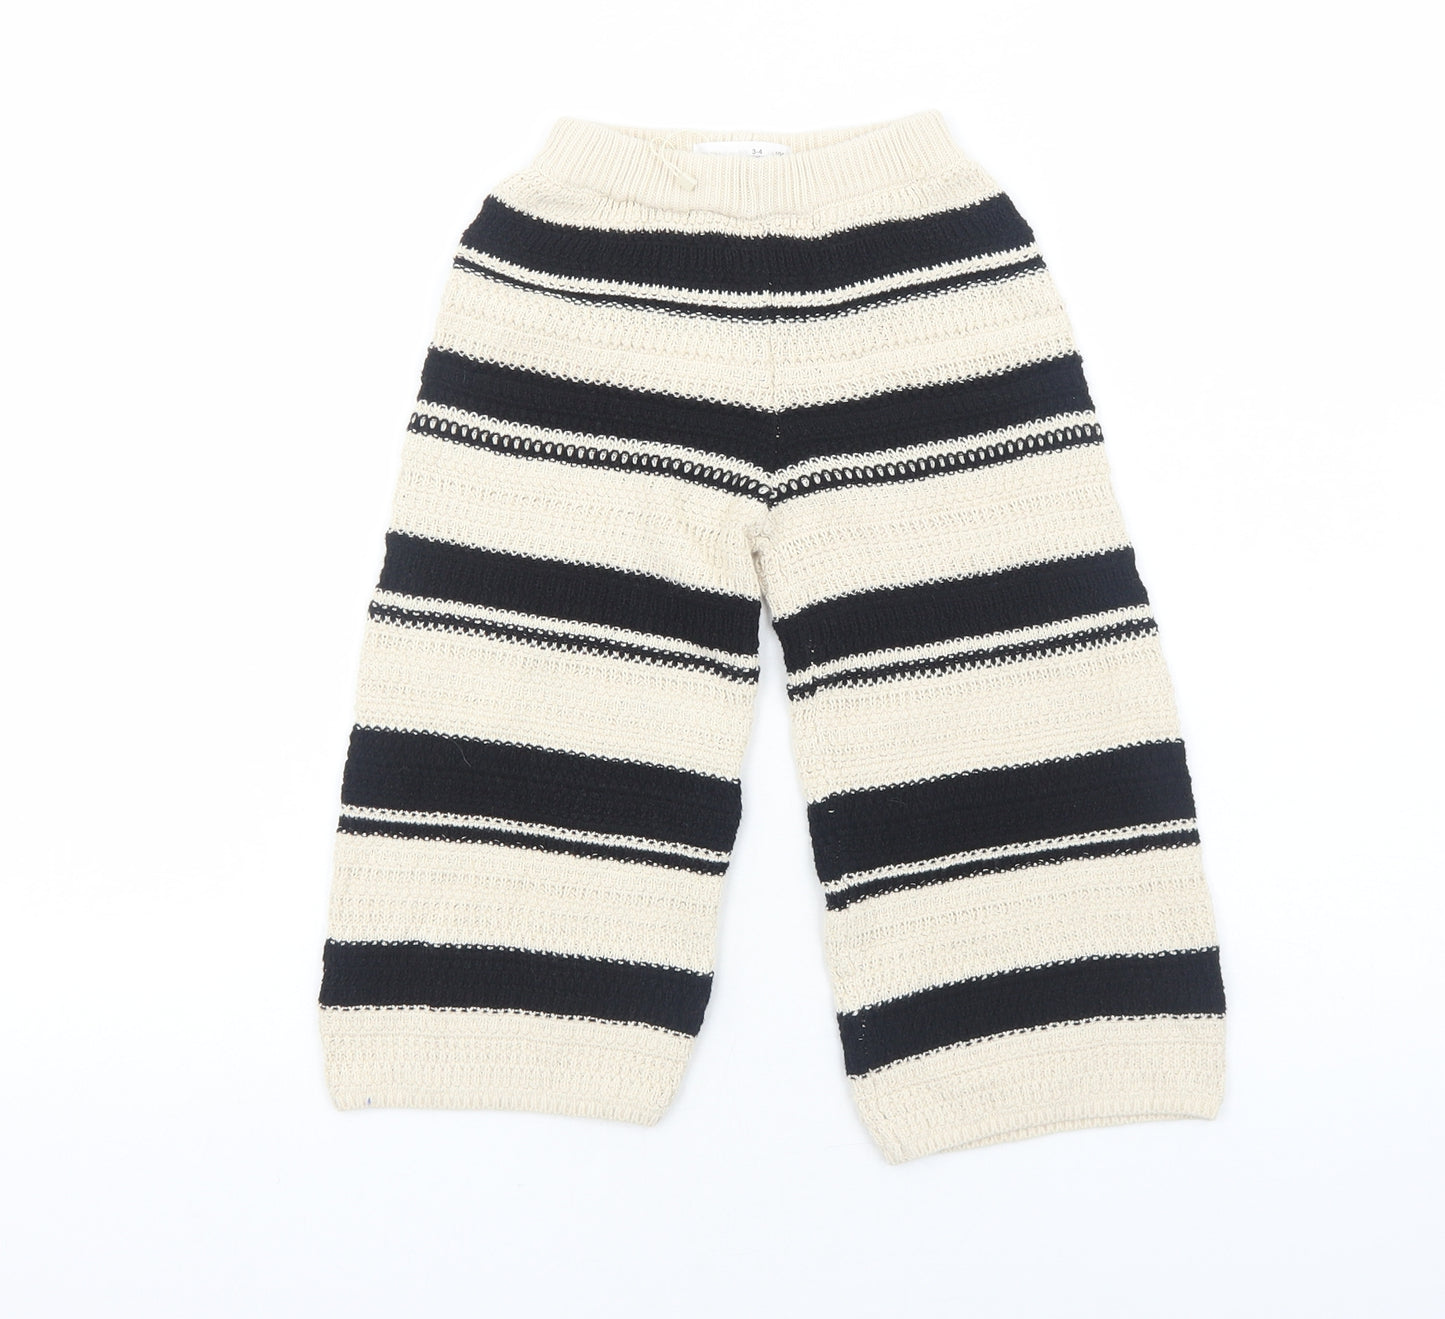 Zara Girls Beige Striped Cotton Pedal Pusher Trousers Size 3-4 Years Regular Pullover